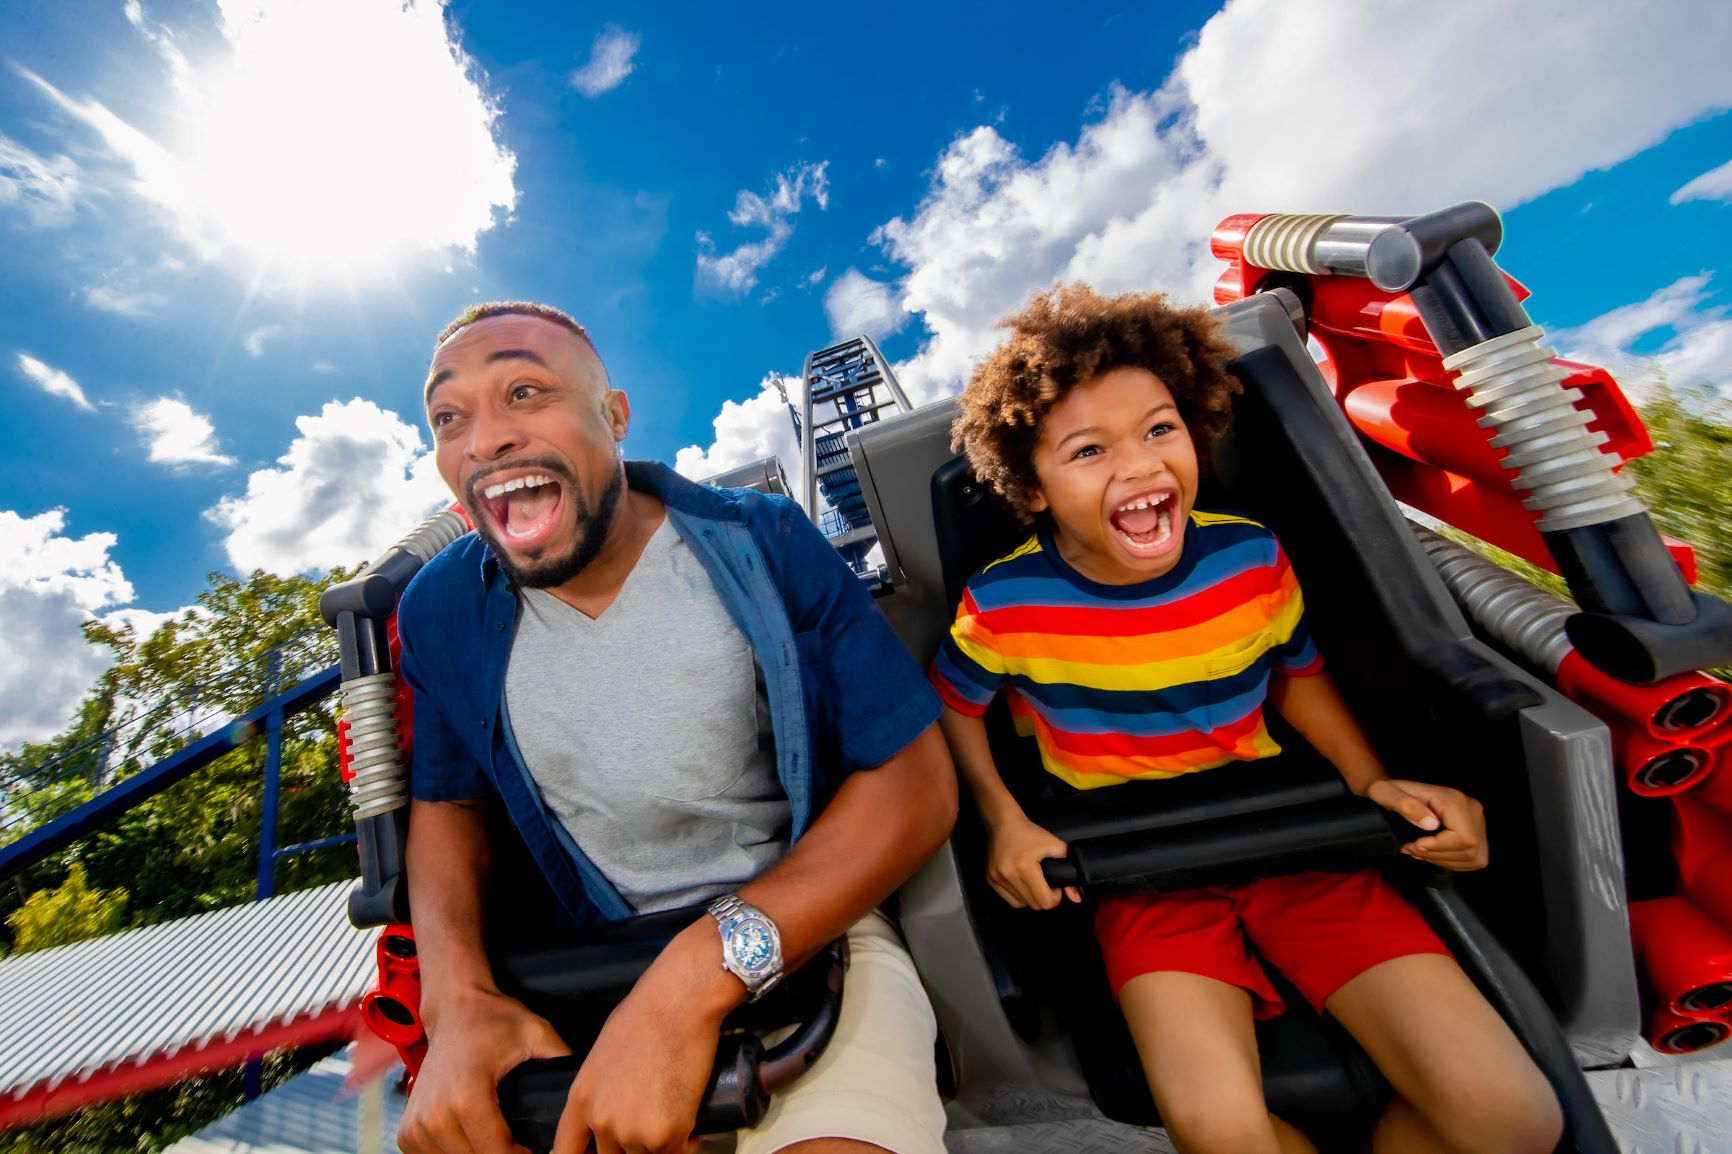 Legoland Florida Tickets And Passes Buy Online And Save